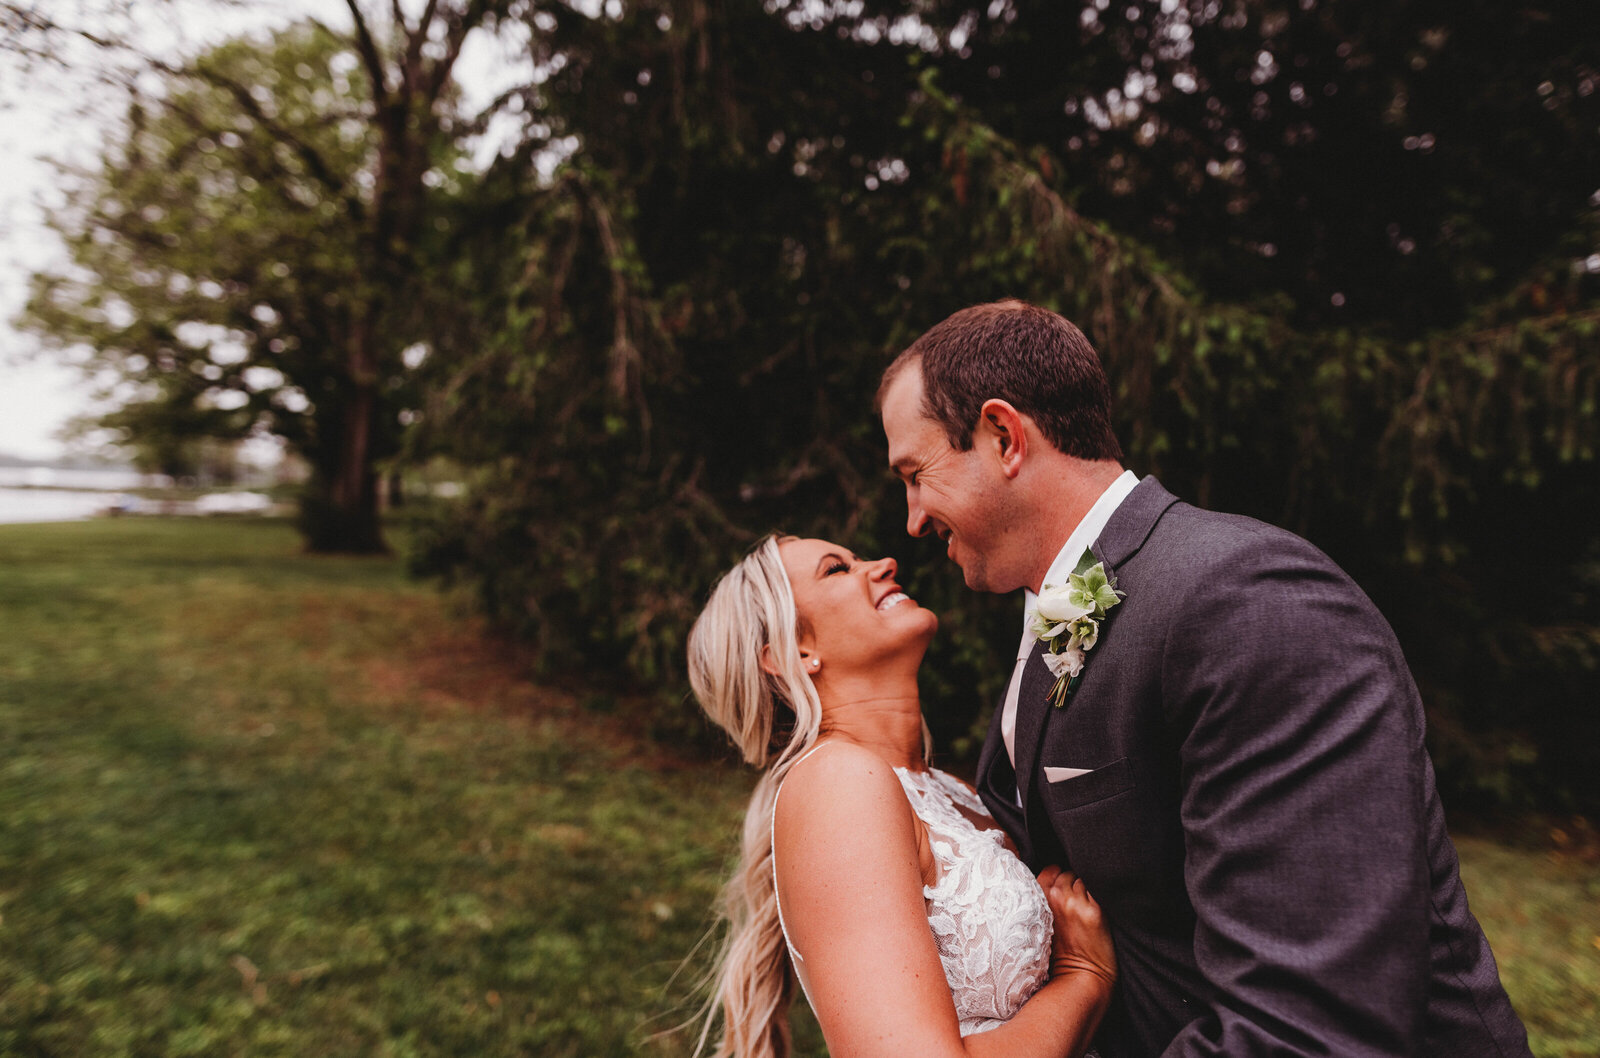 newlyweds portrait photography on a waterfront venue in Maryland, rainy day spring wedding photography